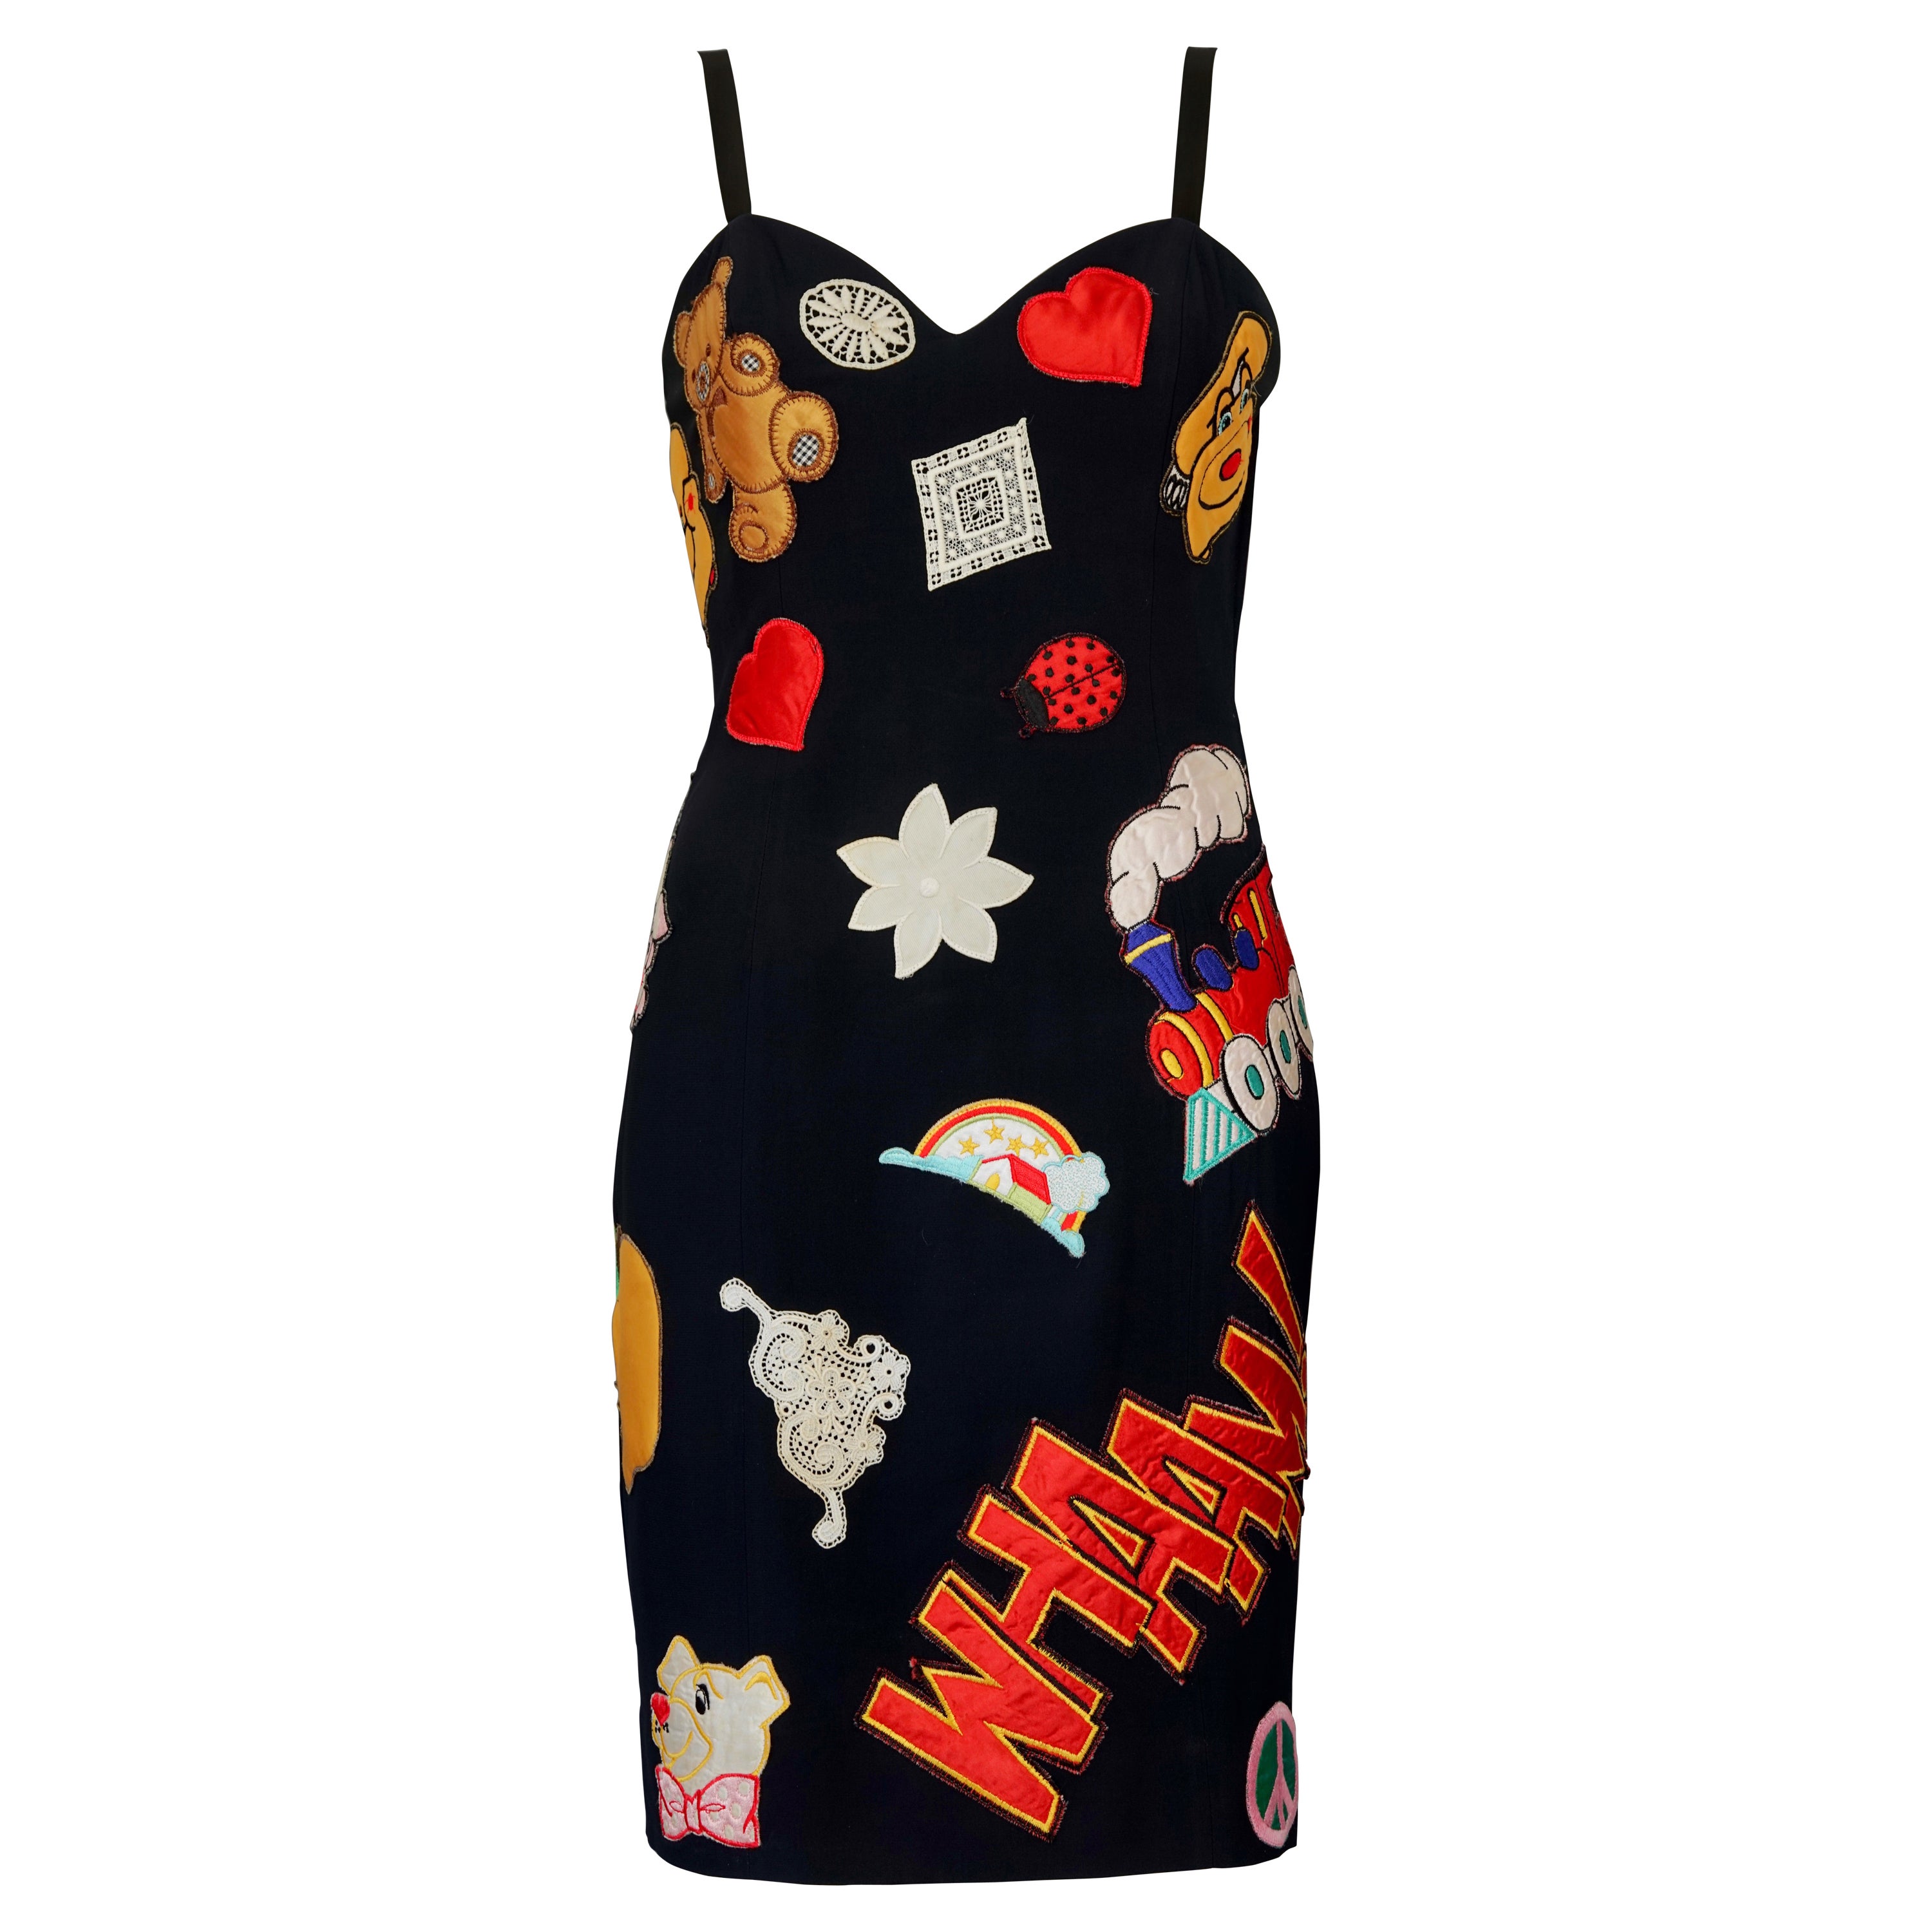 Vintage 1994 MOSCHINO COUTURE "WHAM" Patchwork Novelty Dress For Sale